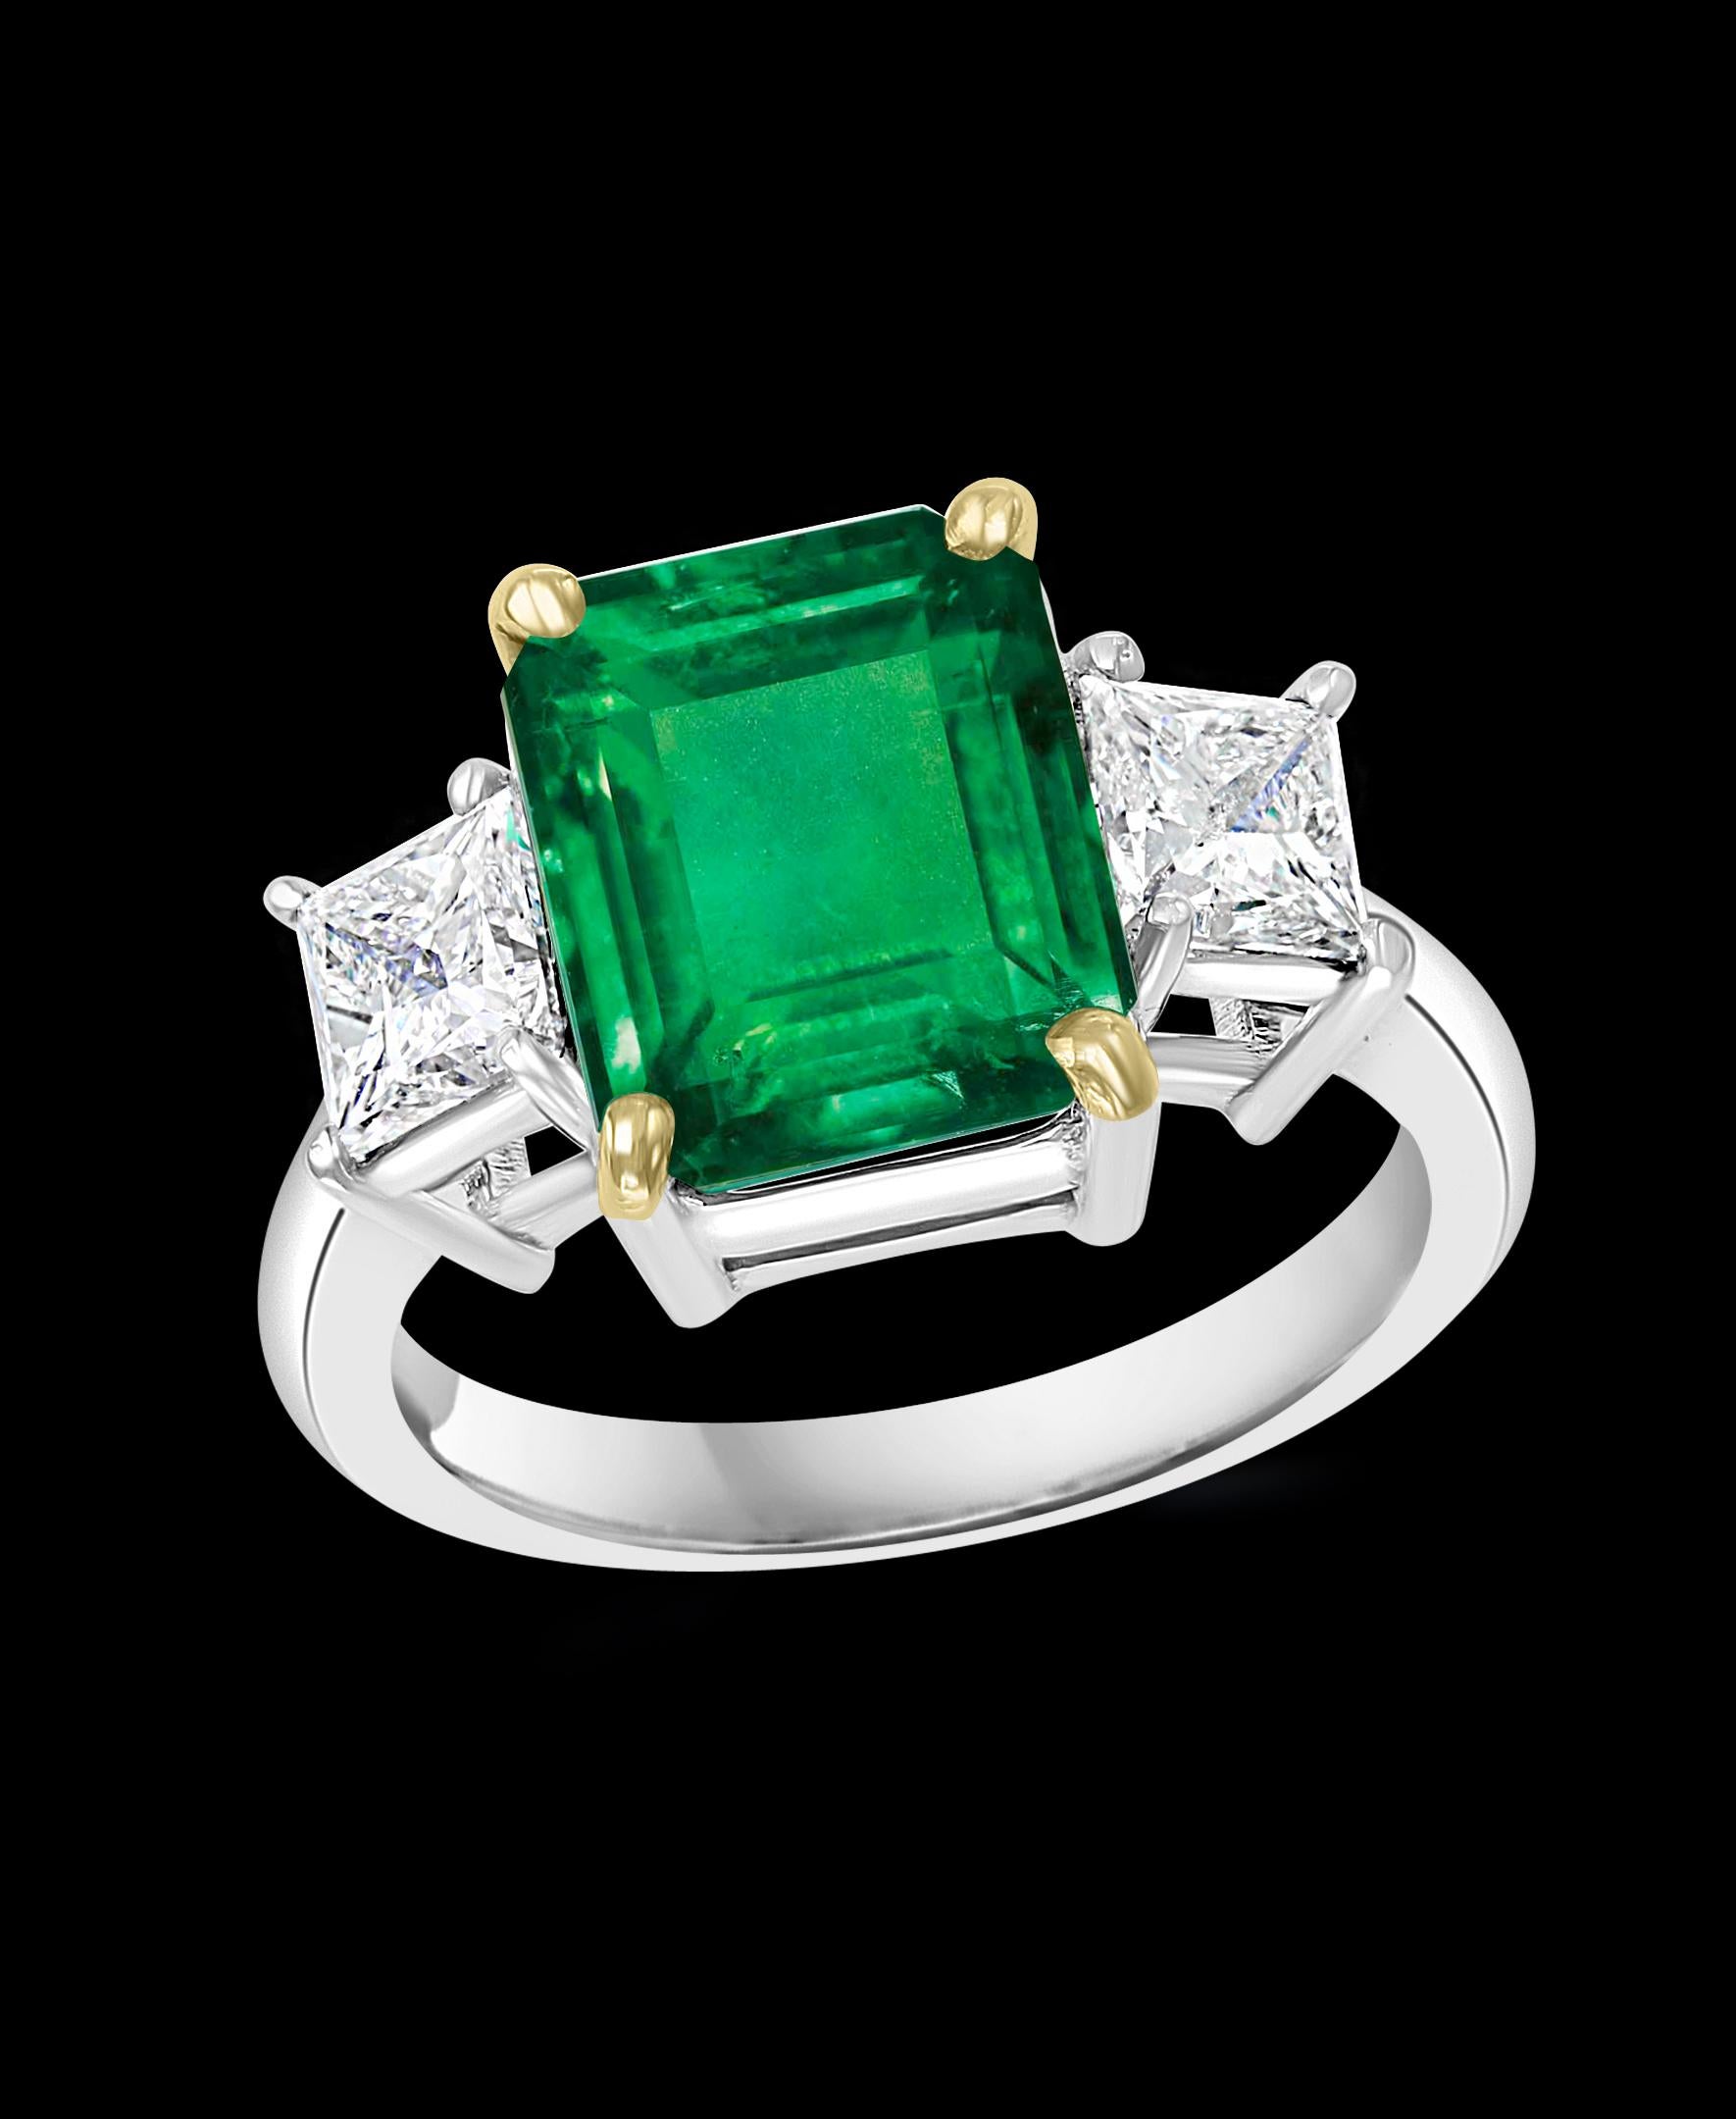 4.5 Carat Emerald Cut Colombian Emerald Diamond 18 Karat White gold Ring
Estate piece Natural Emerald 
Two Emerald cut Diamonds on either side of the Emerald. 
18 K White gold 6.2 Gm
2 Diamonds: approximate 1.4 ct, Total weight 
 0.7 ct each